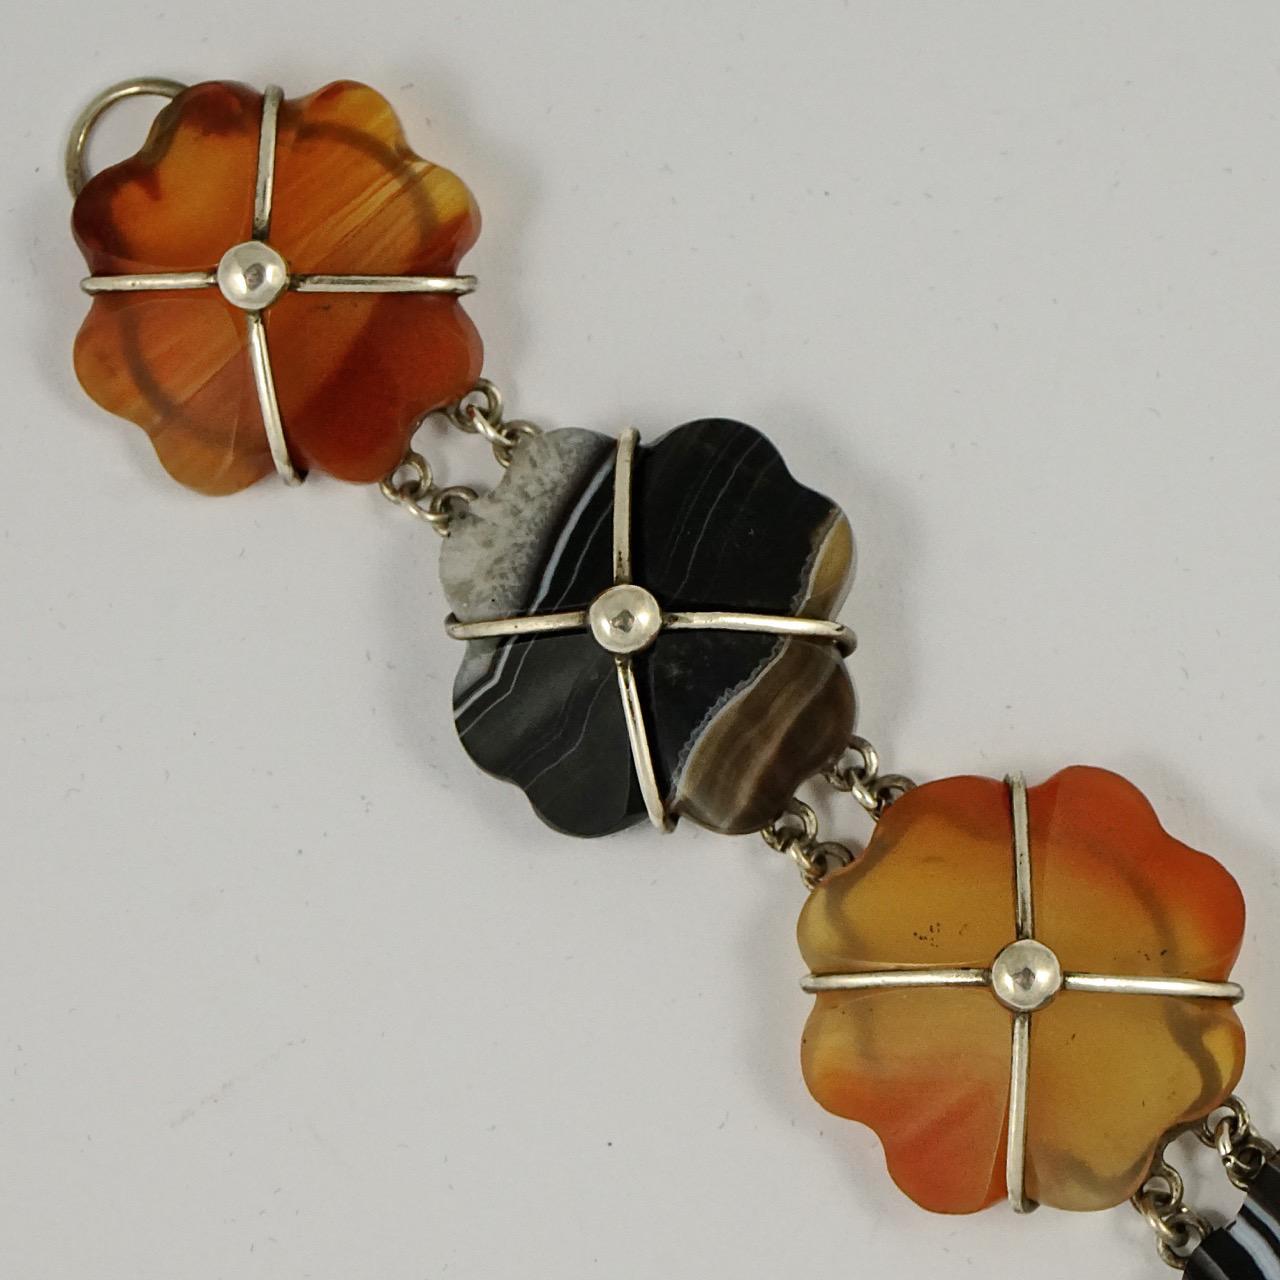 Victorian silver bracelet with beautiful agate flowers, and a simple hook fastening. The lovely carved and polished agate links include banded agate and carnelian. The bracelet tests as silver. Measuring length 18.5cm / 7.3 inches by width 2.5cm / 1